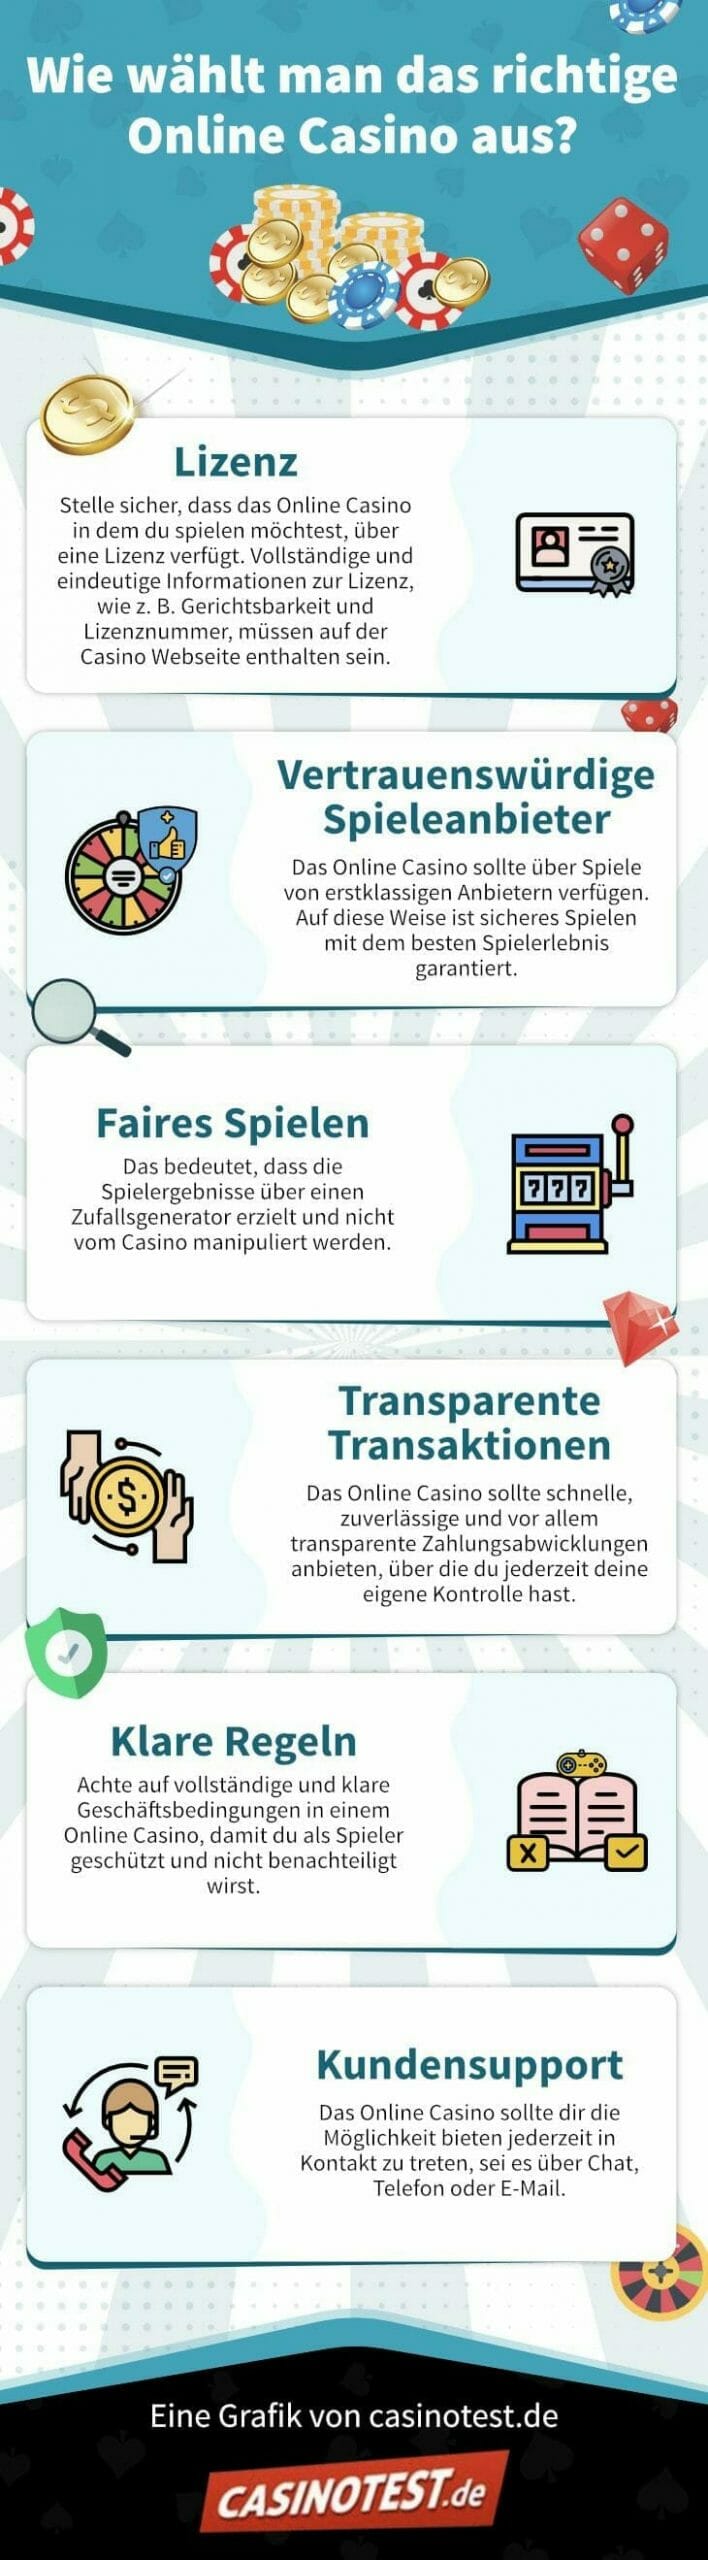 infographic-how-to-choose-the-right-casino